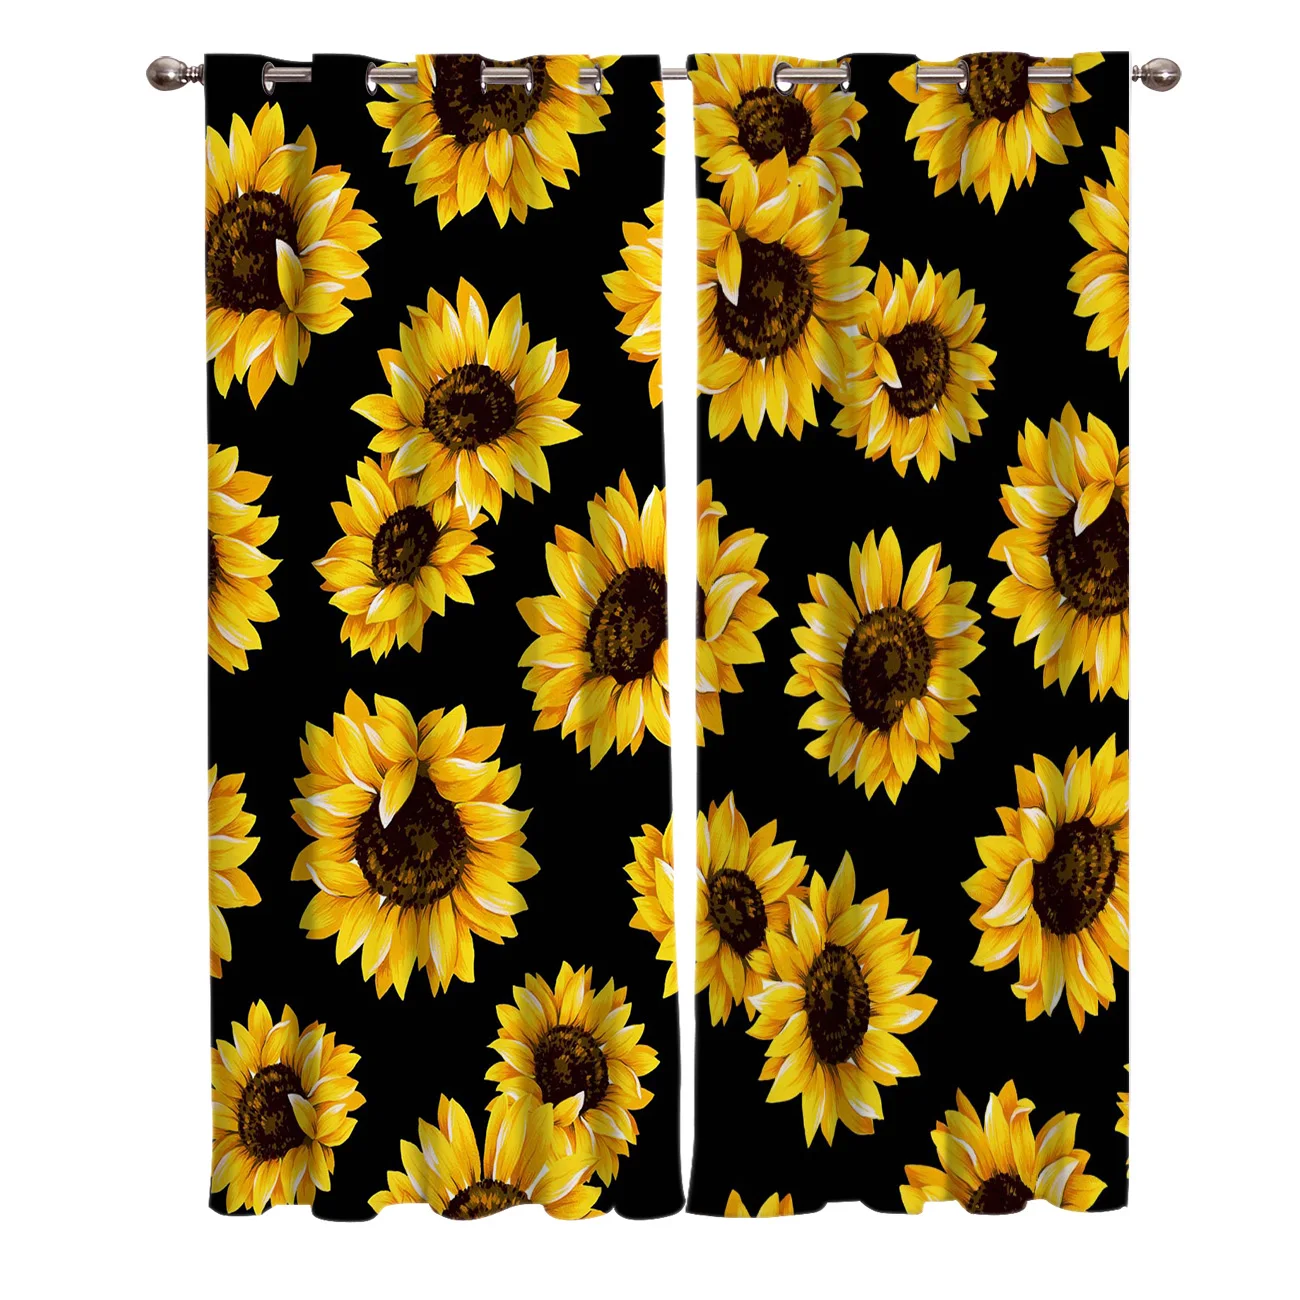 Sunflower Plant Natural Yellow Curtains For Window Treatment Drapes Window Curtains For Living Room Bedroom Kids Room Home Decor